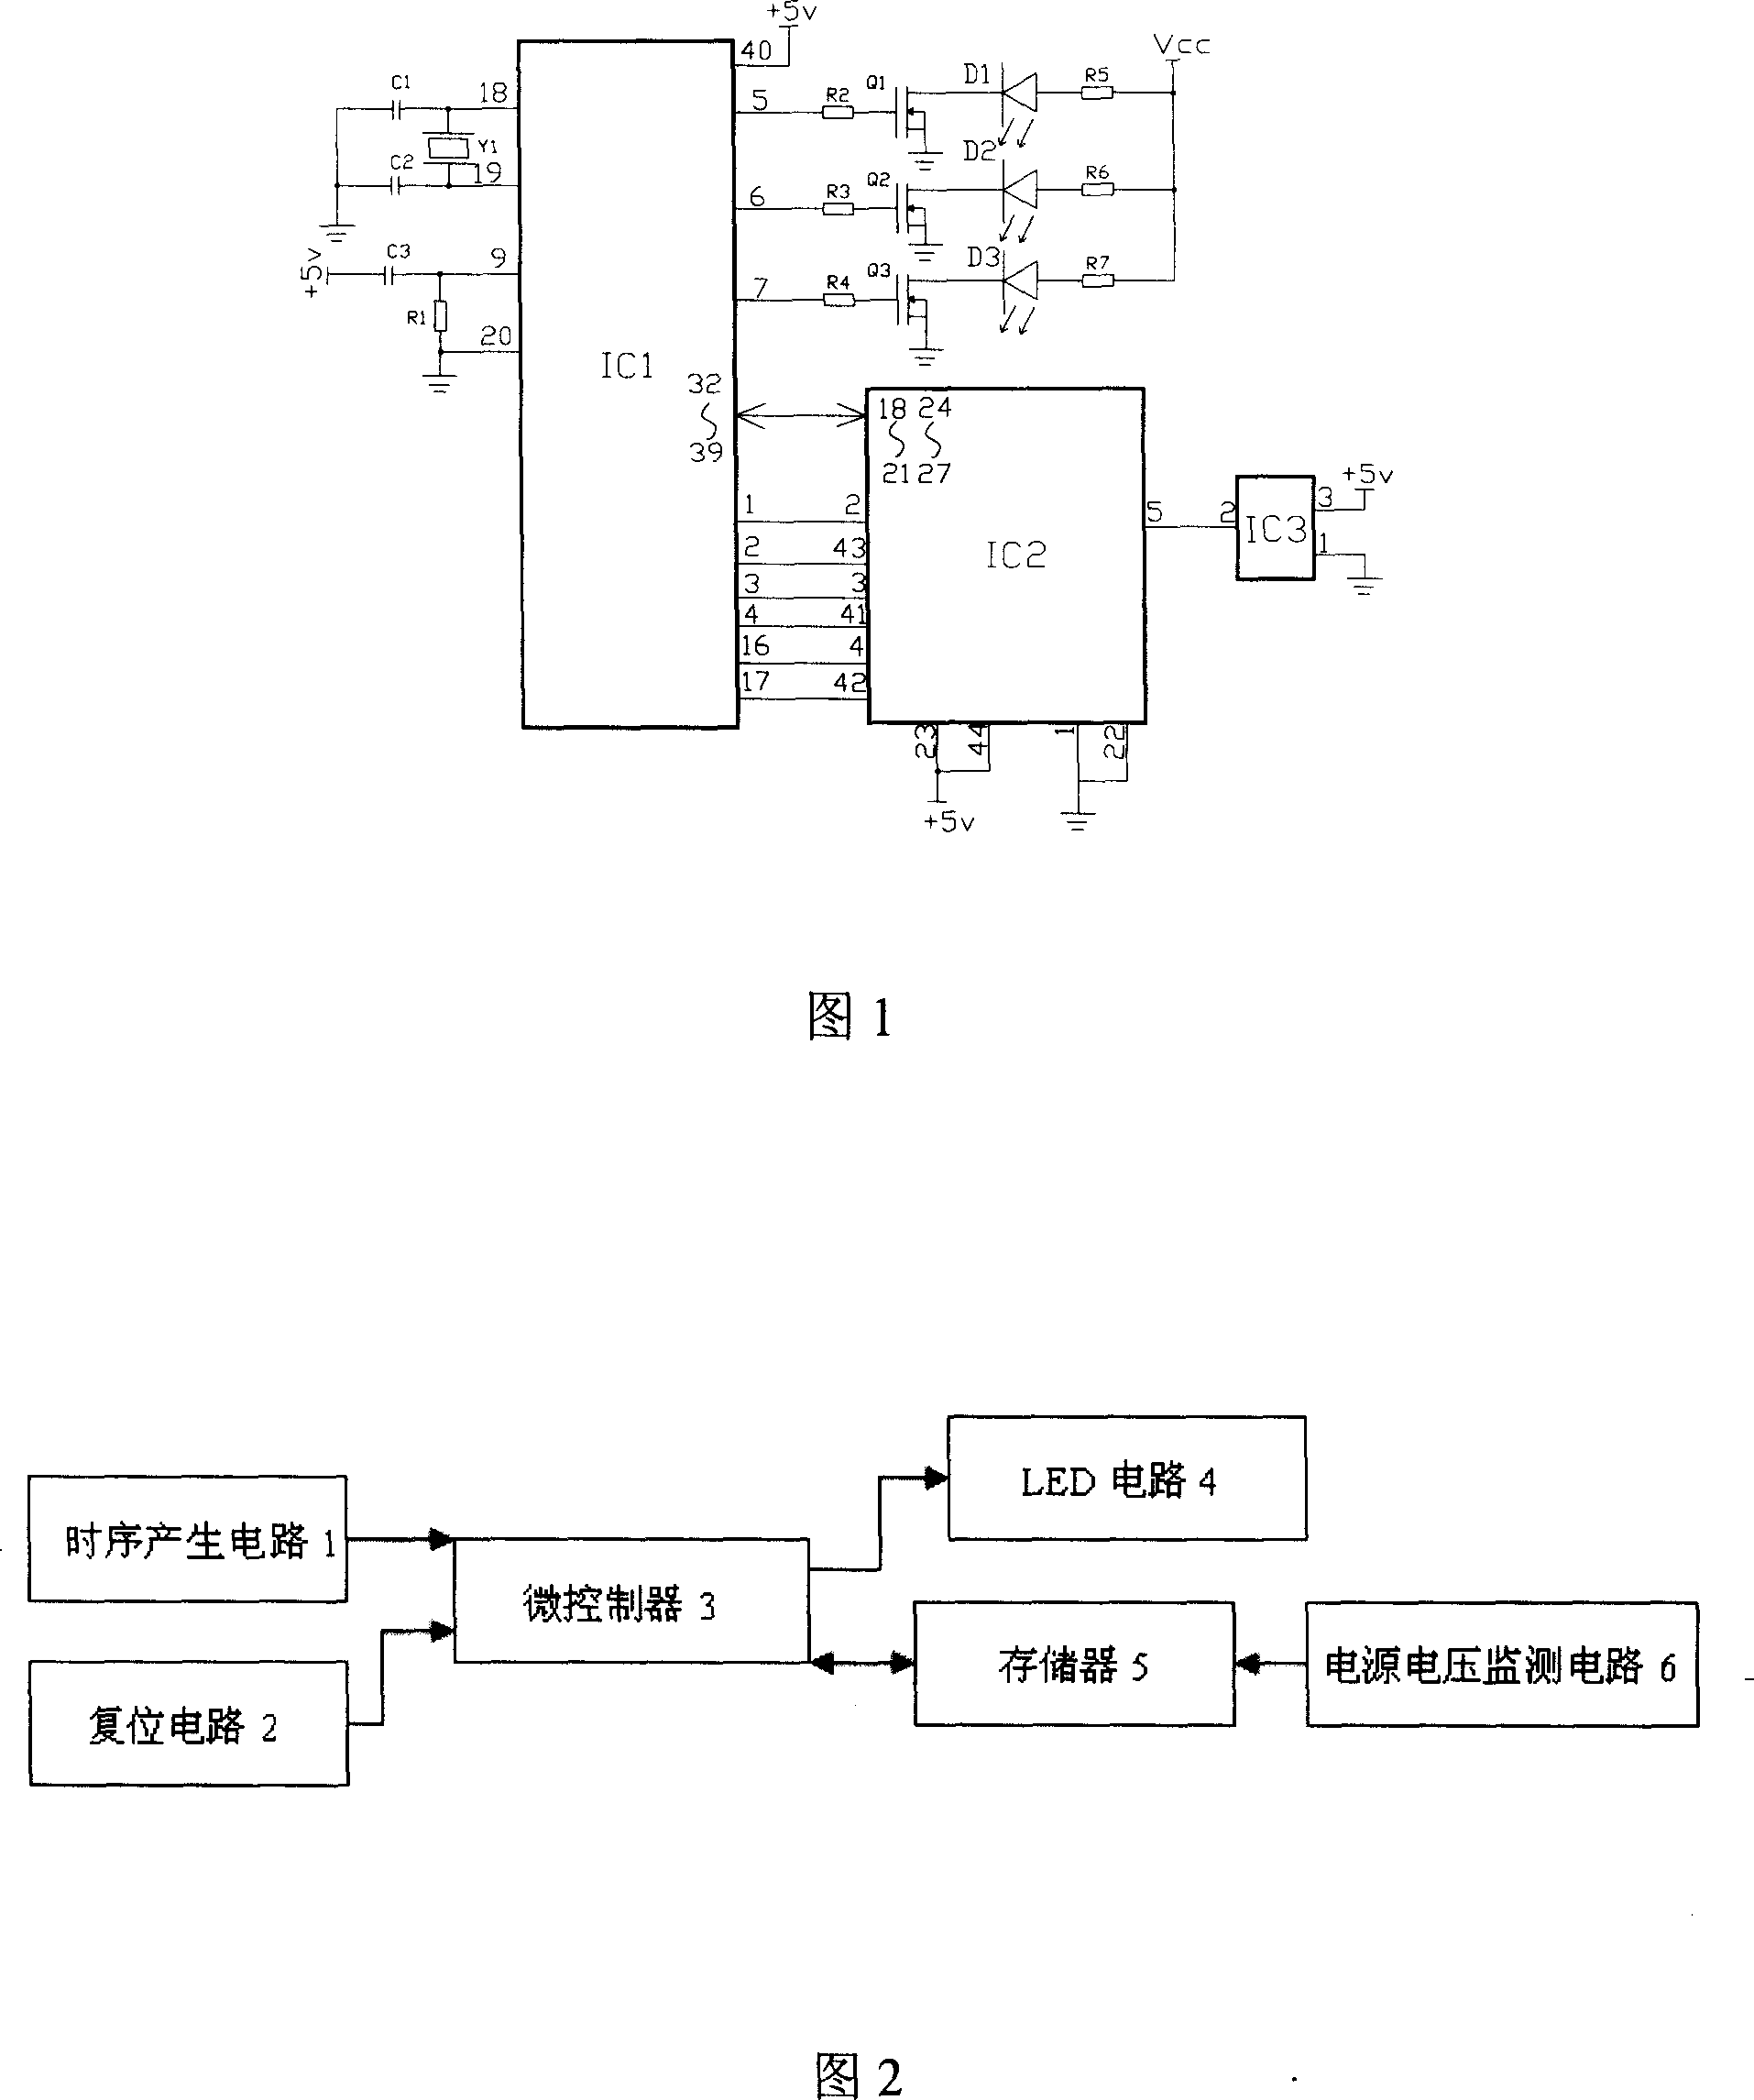 Method and circuits for controlling brightness of three-color luminous diode used for back light source